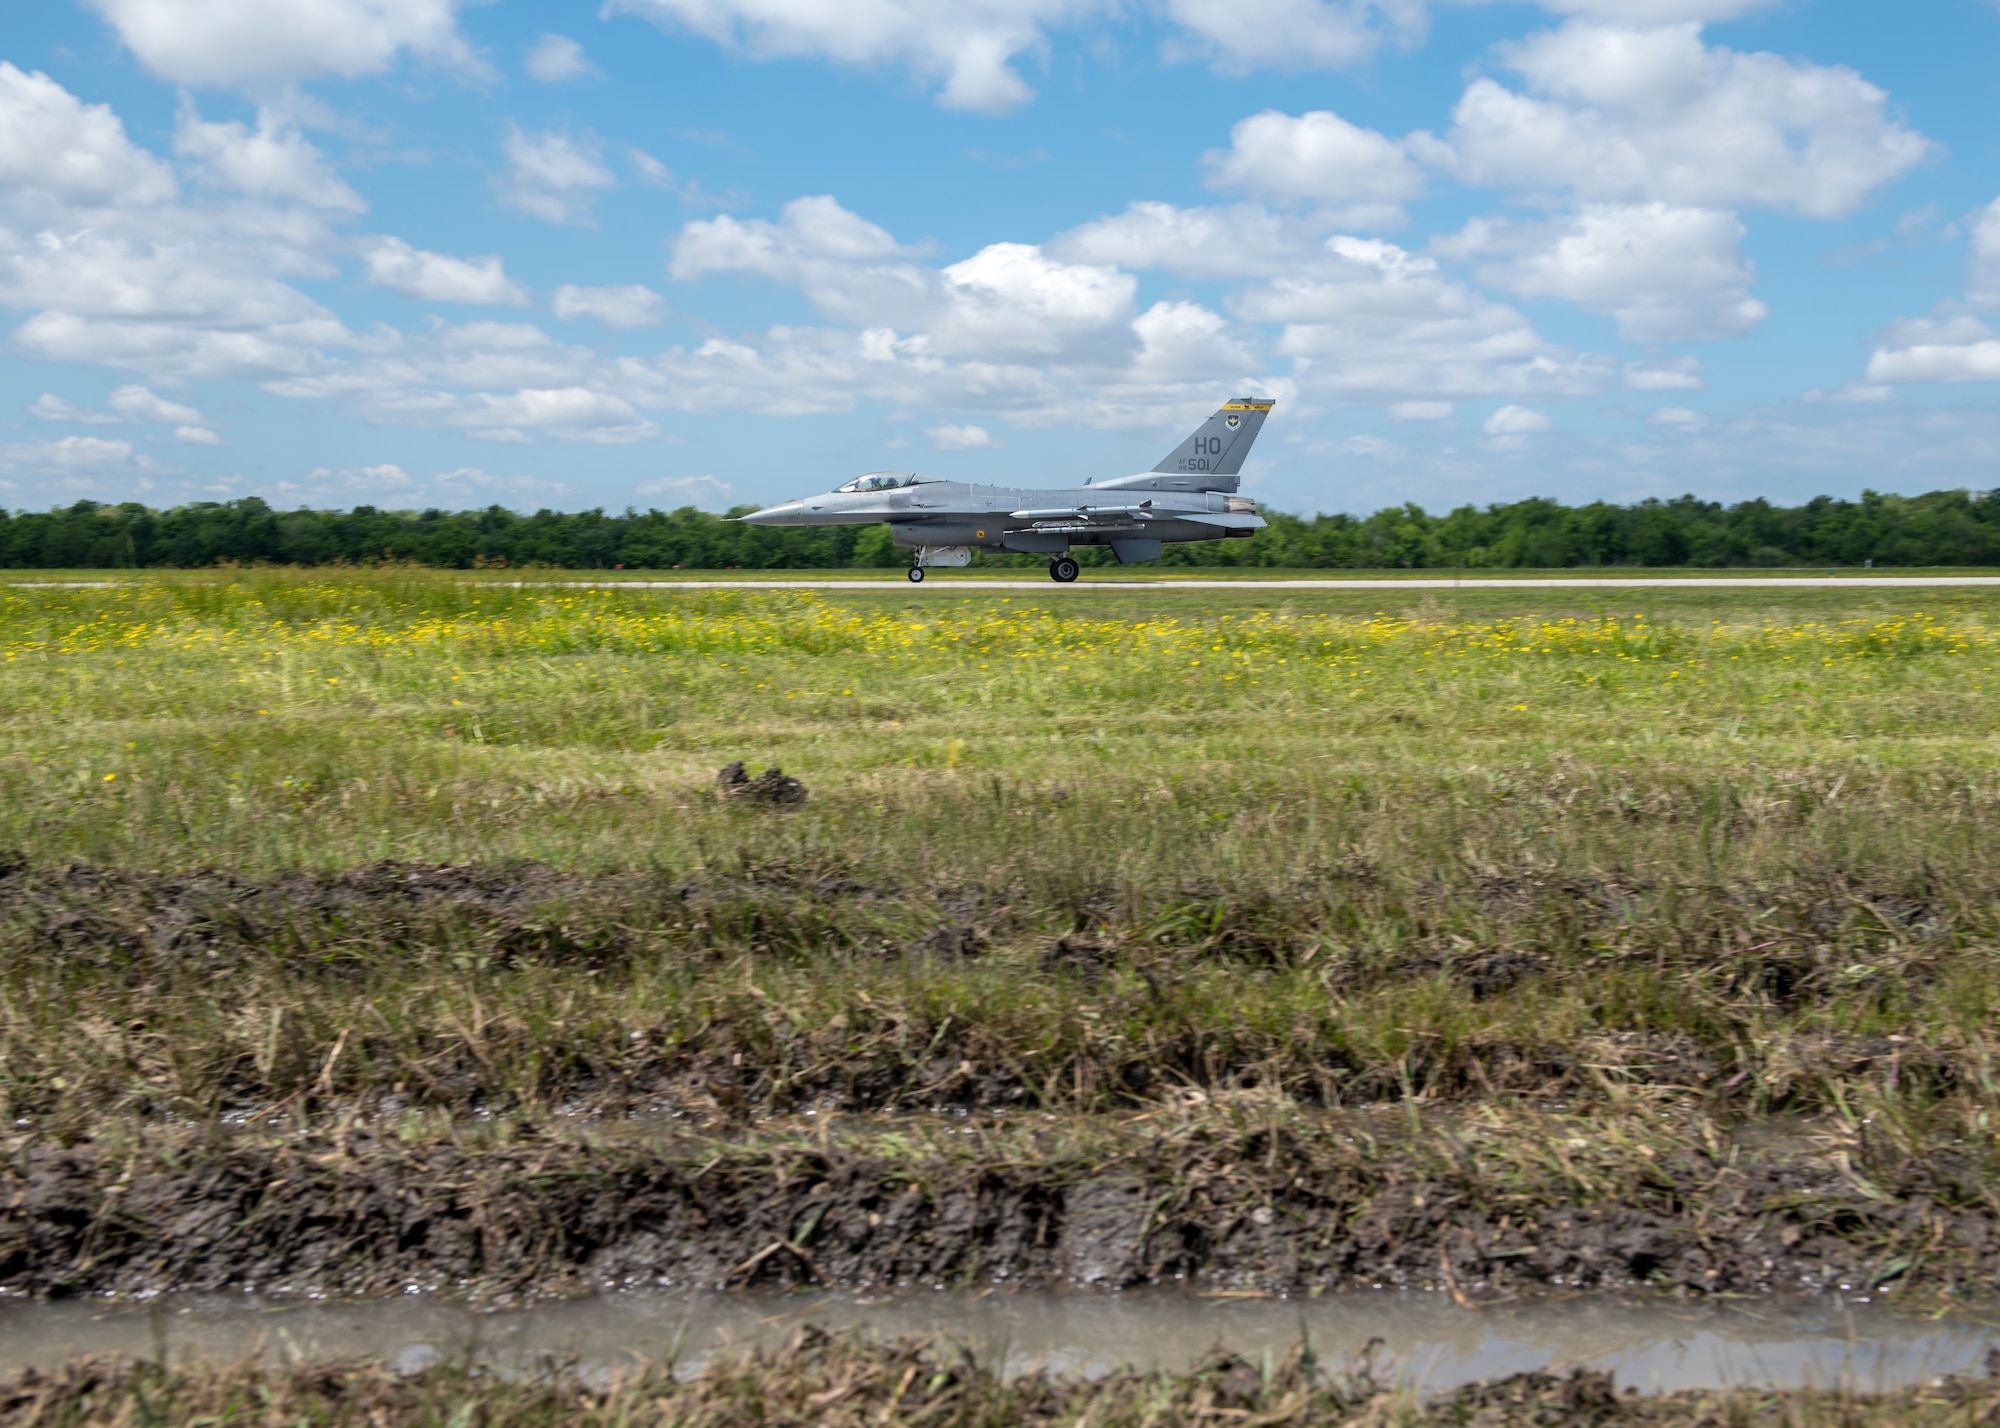 An 8th Fighter Squadron F-16 Fighting Falcon taxis down the runway, April 9, 2019, on Naval Air Station Joint Reserve Base New Orleans, La. During the temporary duty assignment, Viper pilots participated in dissimilar aircraft training and close air support exercises. (U.S. Air Force photo by Airman 1st Class Kindra Stewart)